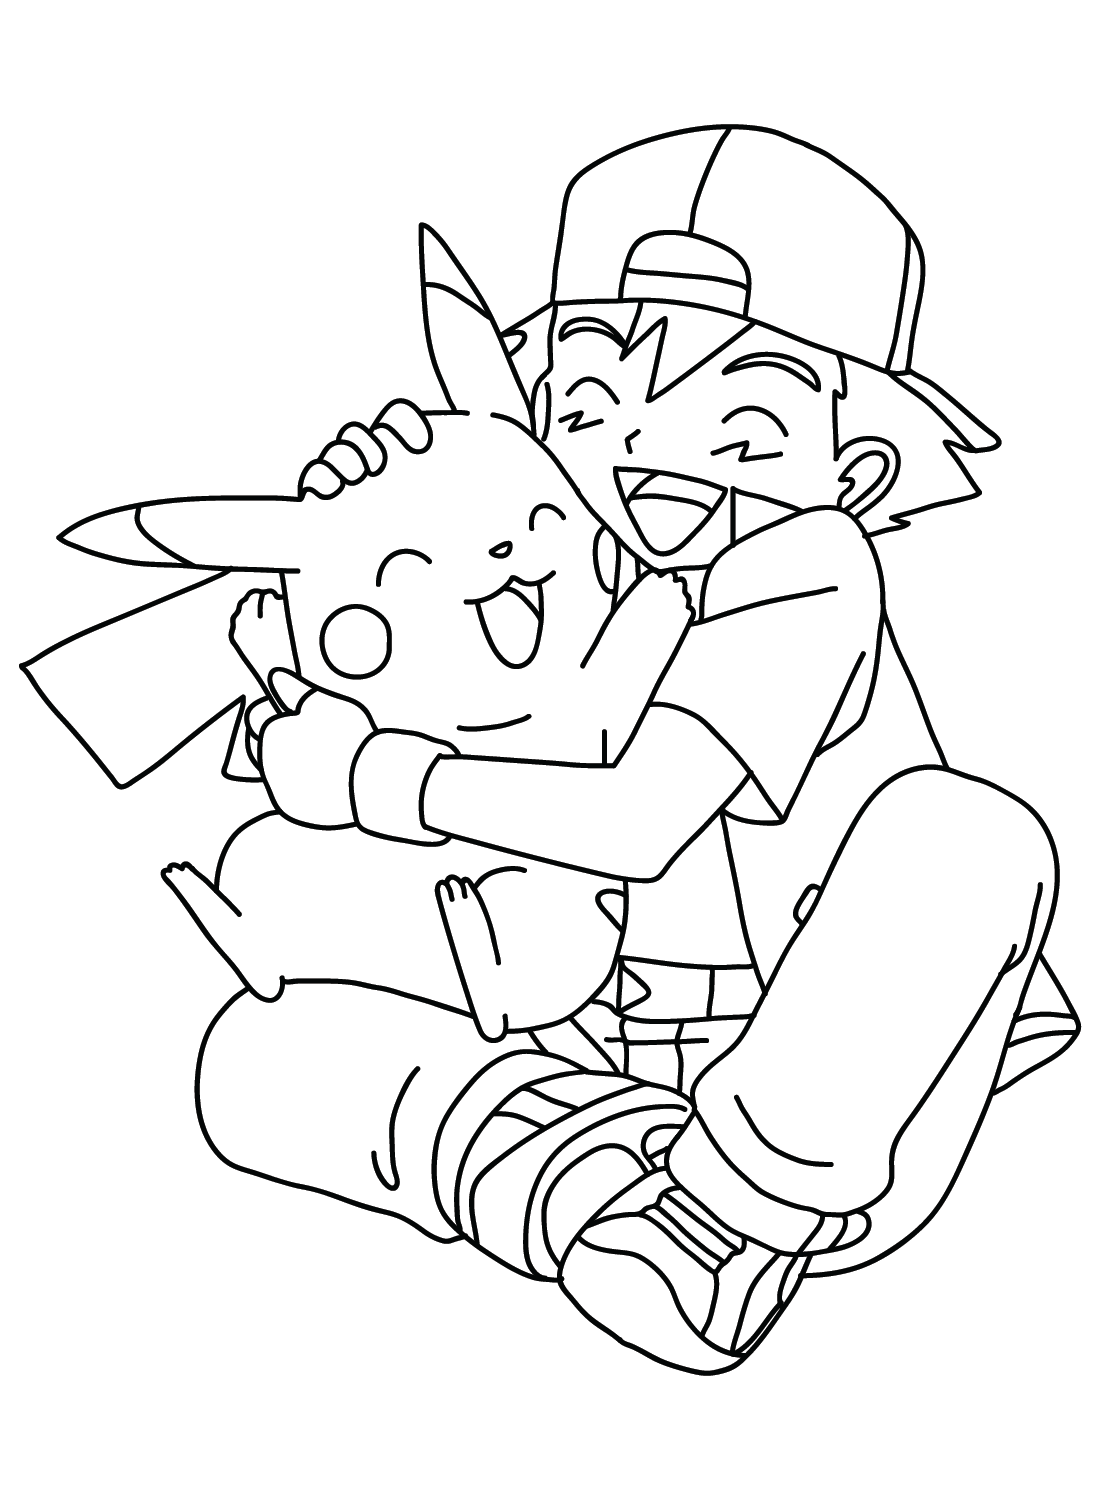 Ash Ketchum with Pikachu Coloring Page from Ash Ketchum